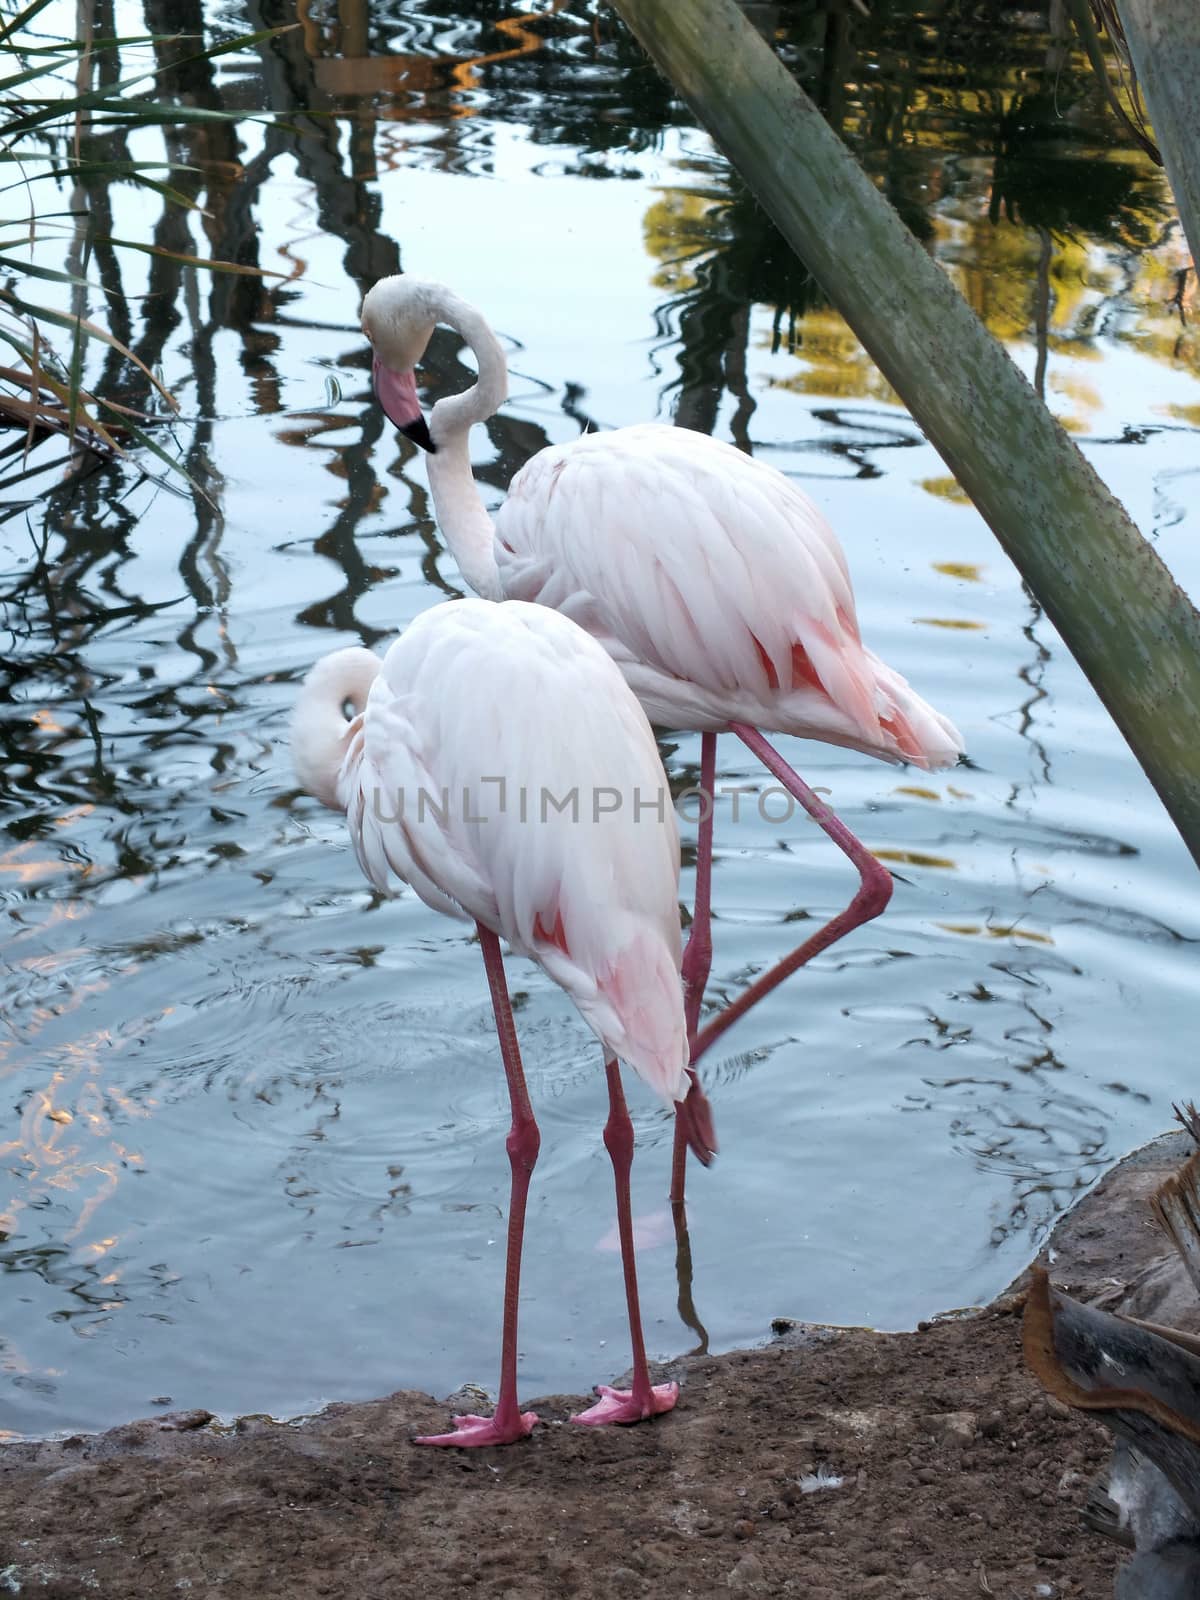 Greater Flamingos (Phoenicopterus roseus) are the largest member of the flamingo family and they are the most widespread. They stand up to 5ft tall, have a wingspan between 4.5 - 5.5 ft and they weigh up to 9lb. 